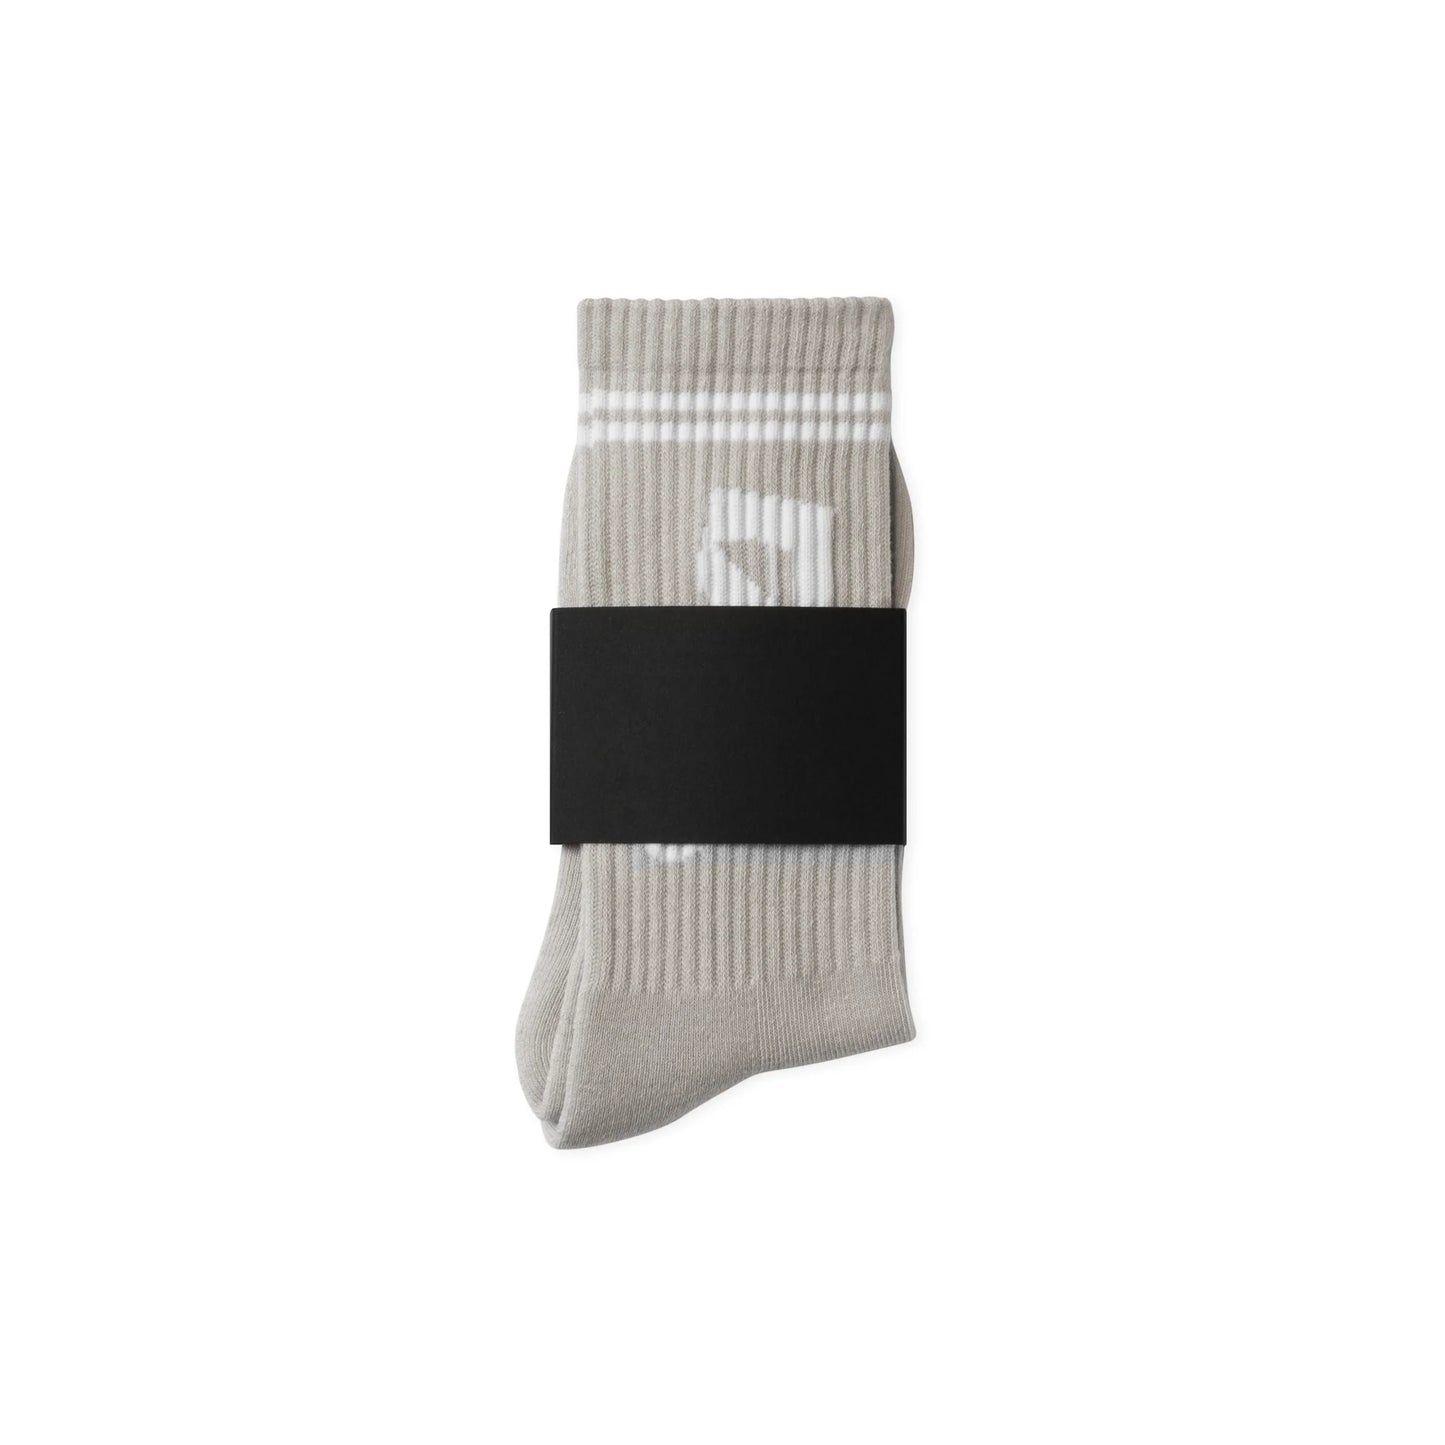 Natural grey sports socks folded in packaging